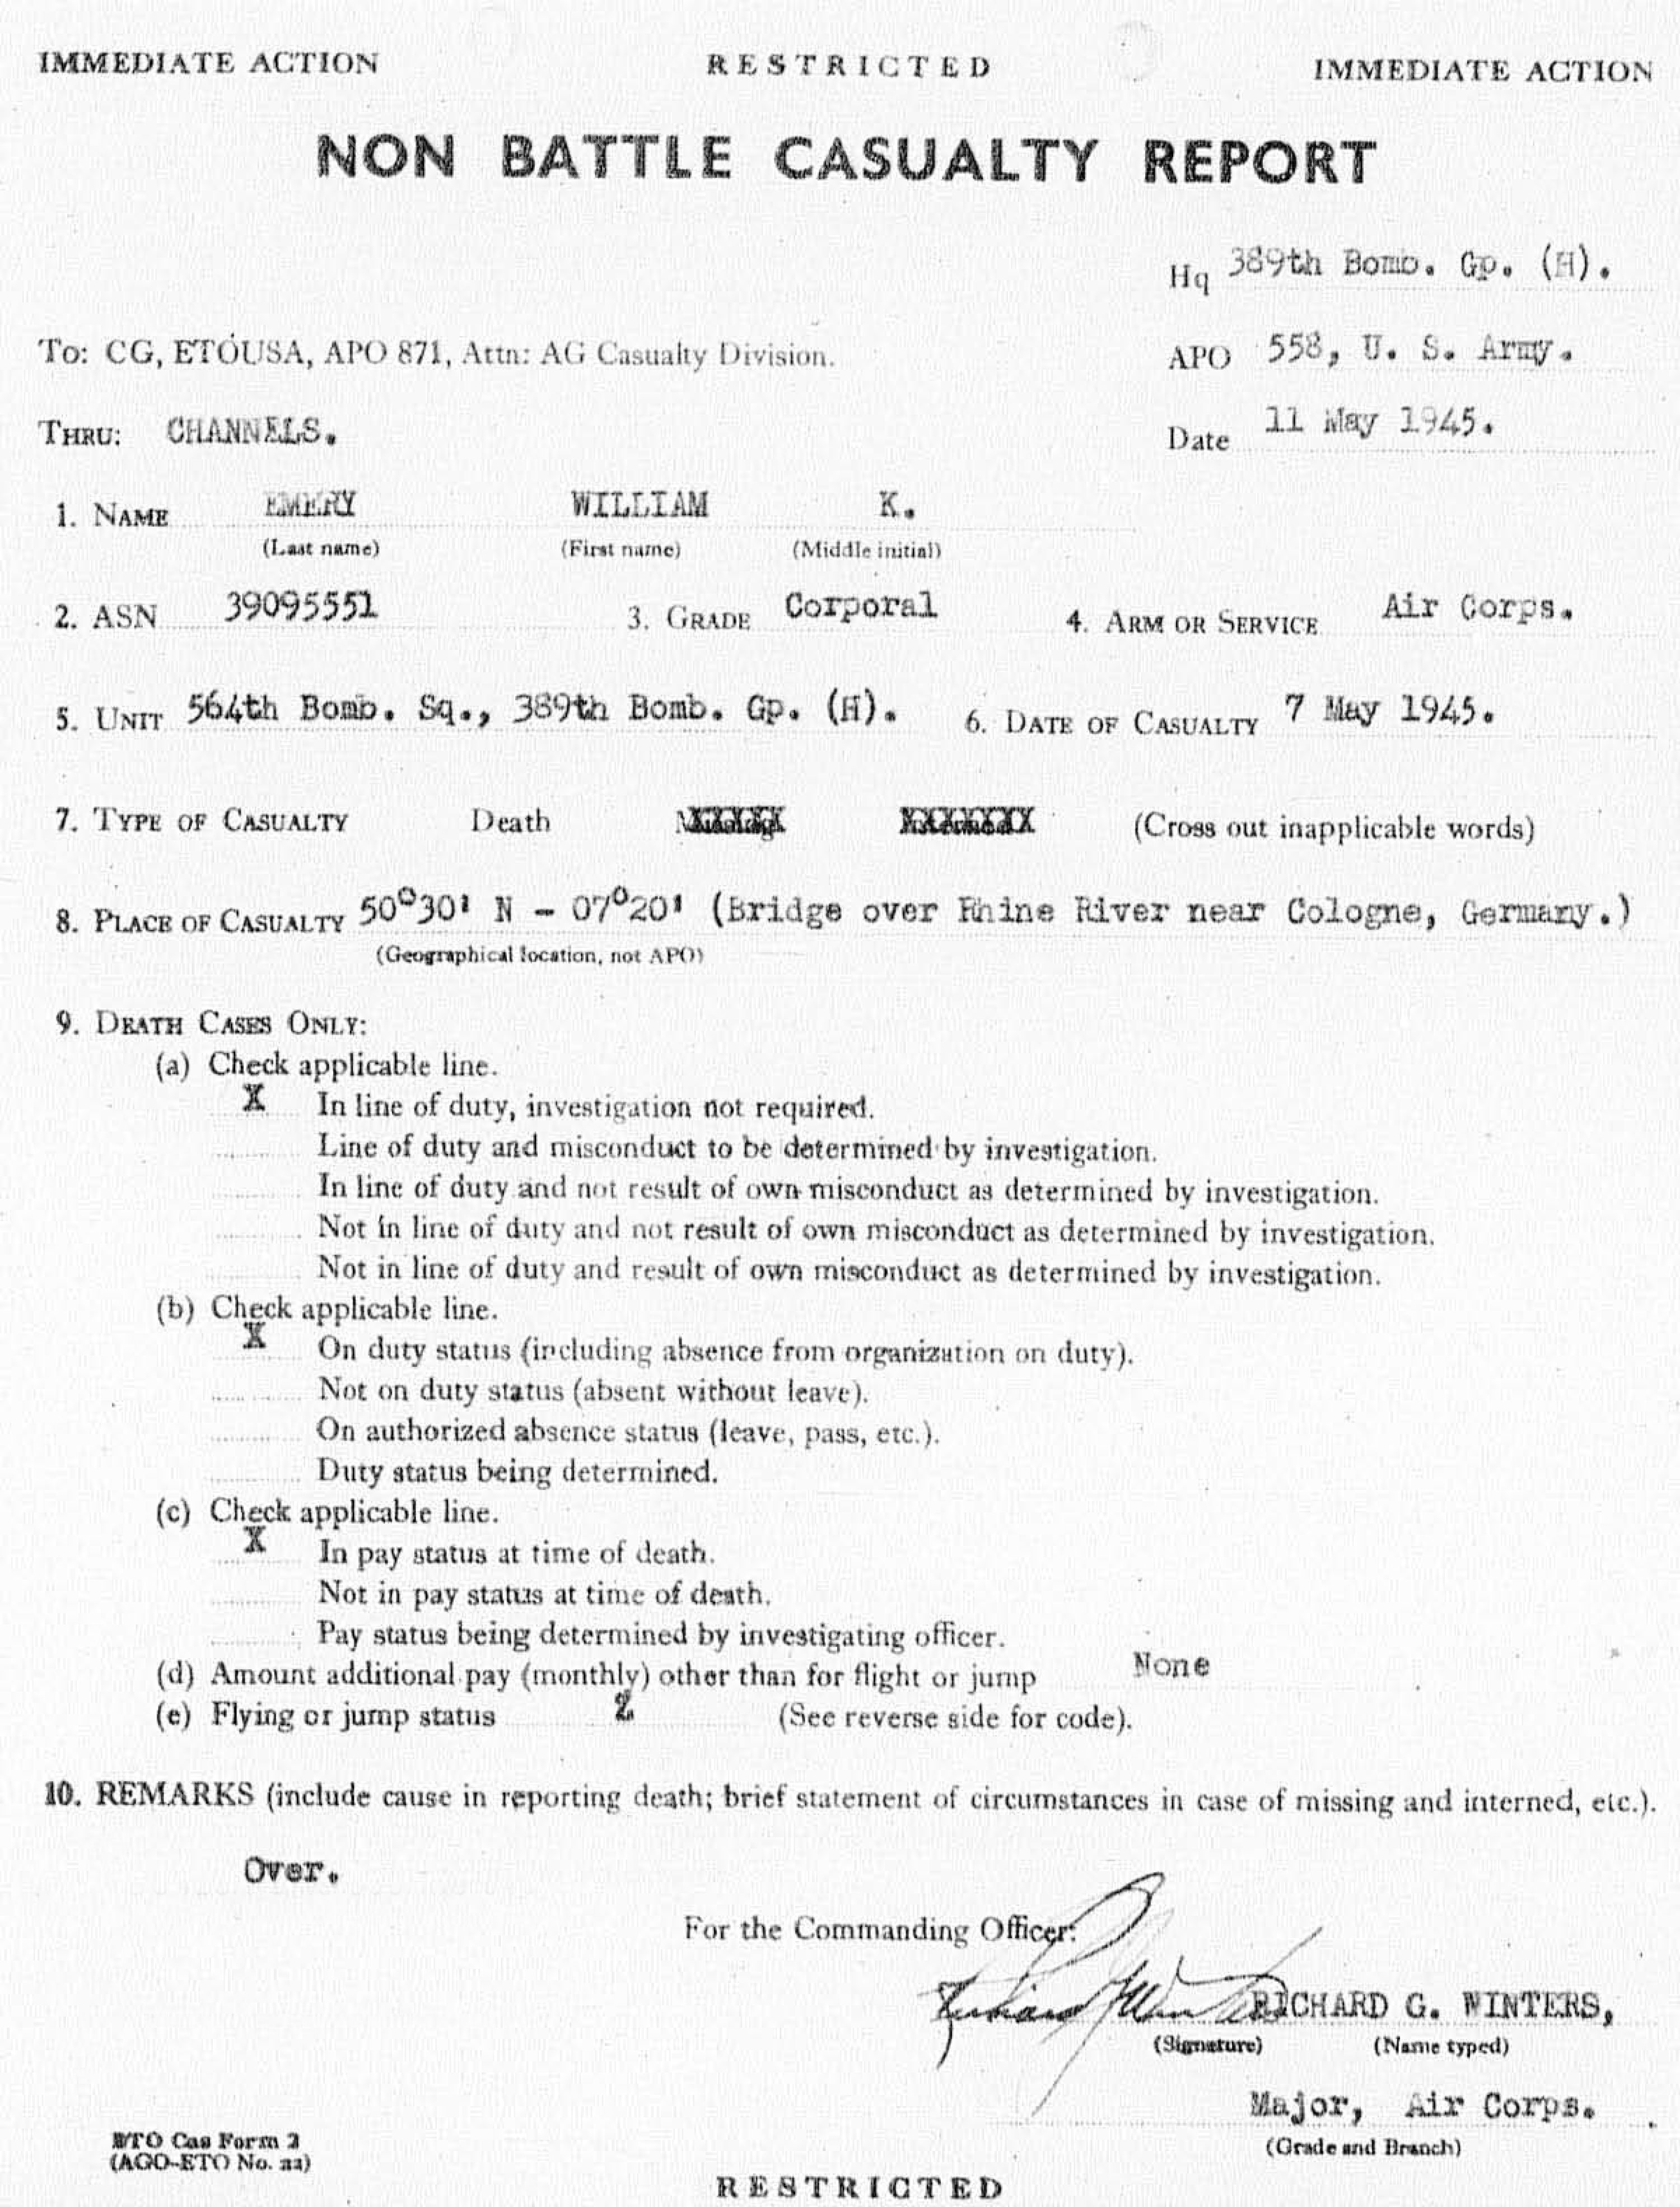 William Emery - Non Battle Casualty Report - May 1945